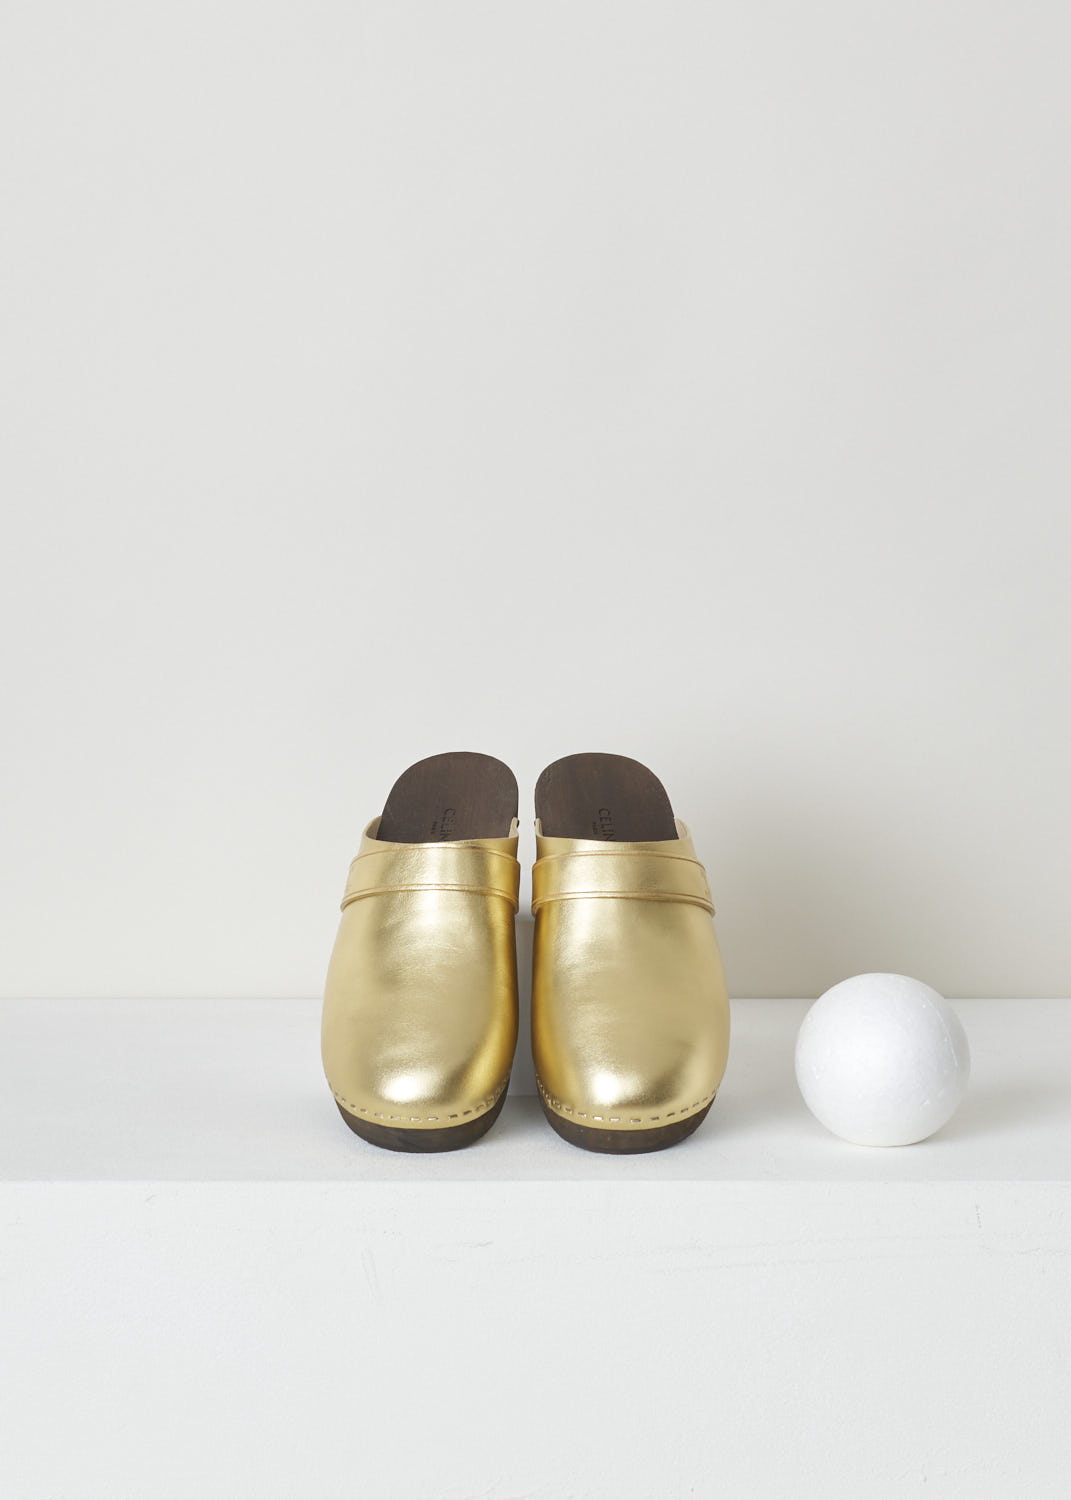 CELINE, METALLIC GOLD CLOGS, 337753093C_35OR, Gold, Top, These regal metallic gold clogs have a rounded nose. This slip-in model has a broad, wood-style sole with a small heel. Across the width of the shoe, a small strip with the Celine Triomphe logo can be found. 


Heel height: 3 cm / 1.18 inch
